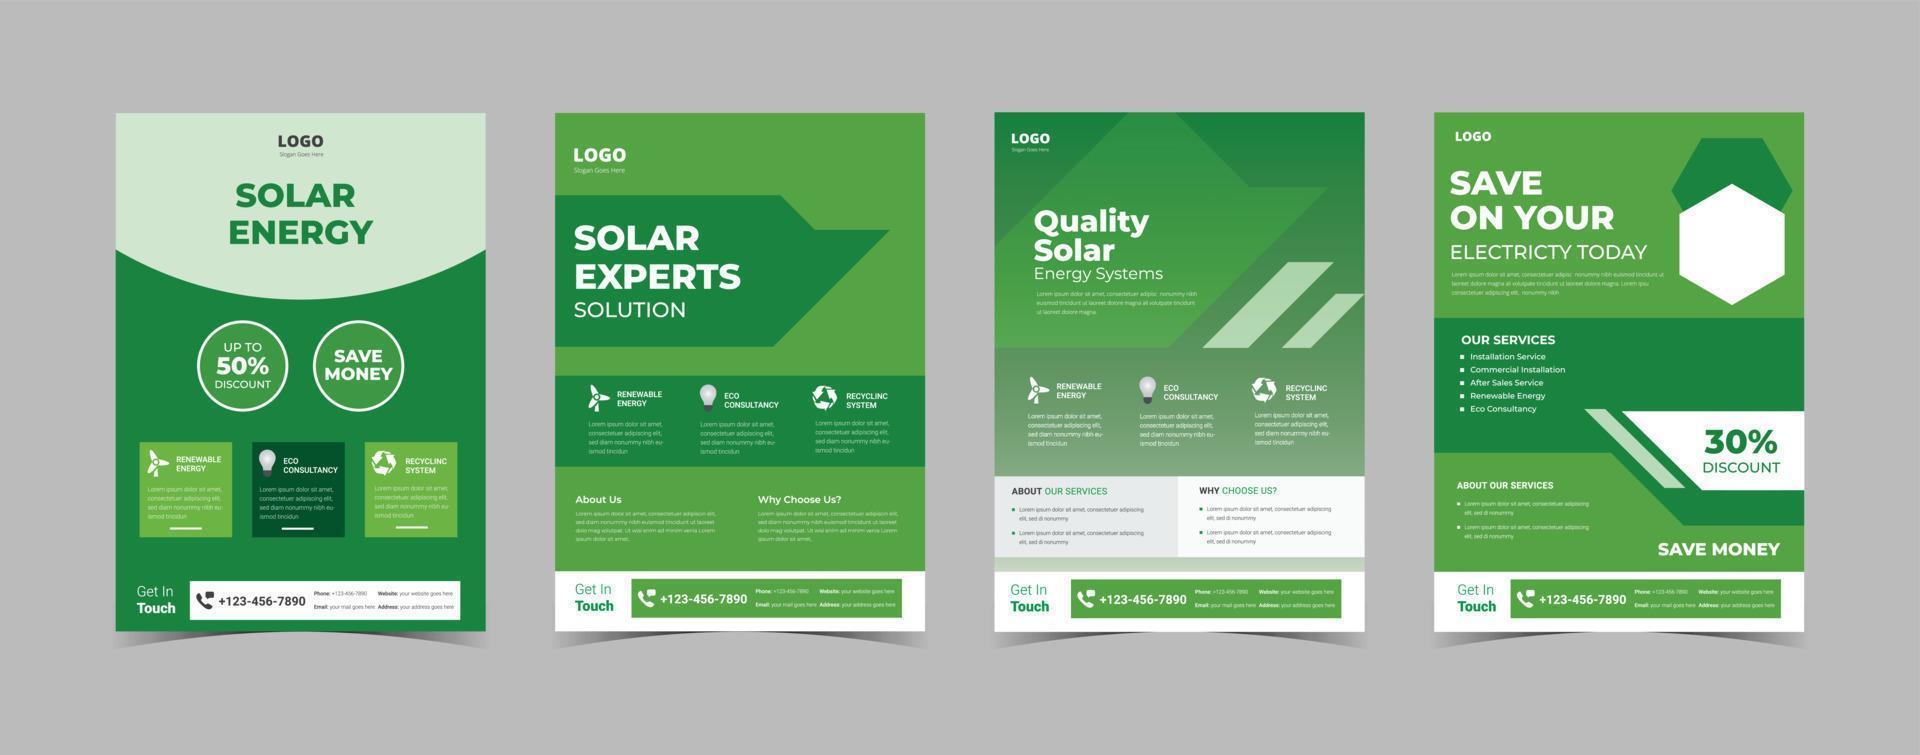 Wind and Solar energy poster design template, Solar Energy flyer templates, solar experts solutions flyer, Solar energy flyer design template bundle. Go green save energy poster leaflet design vector